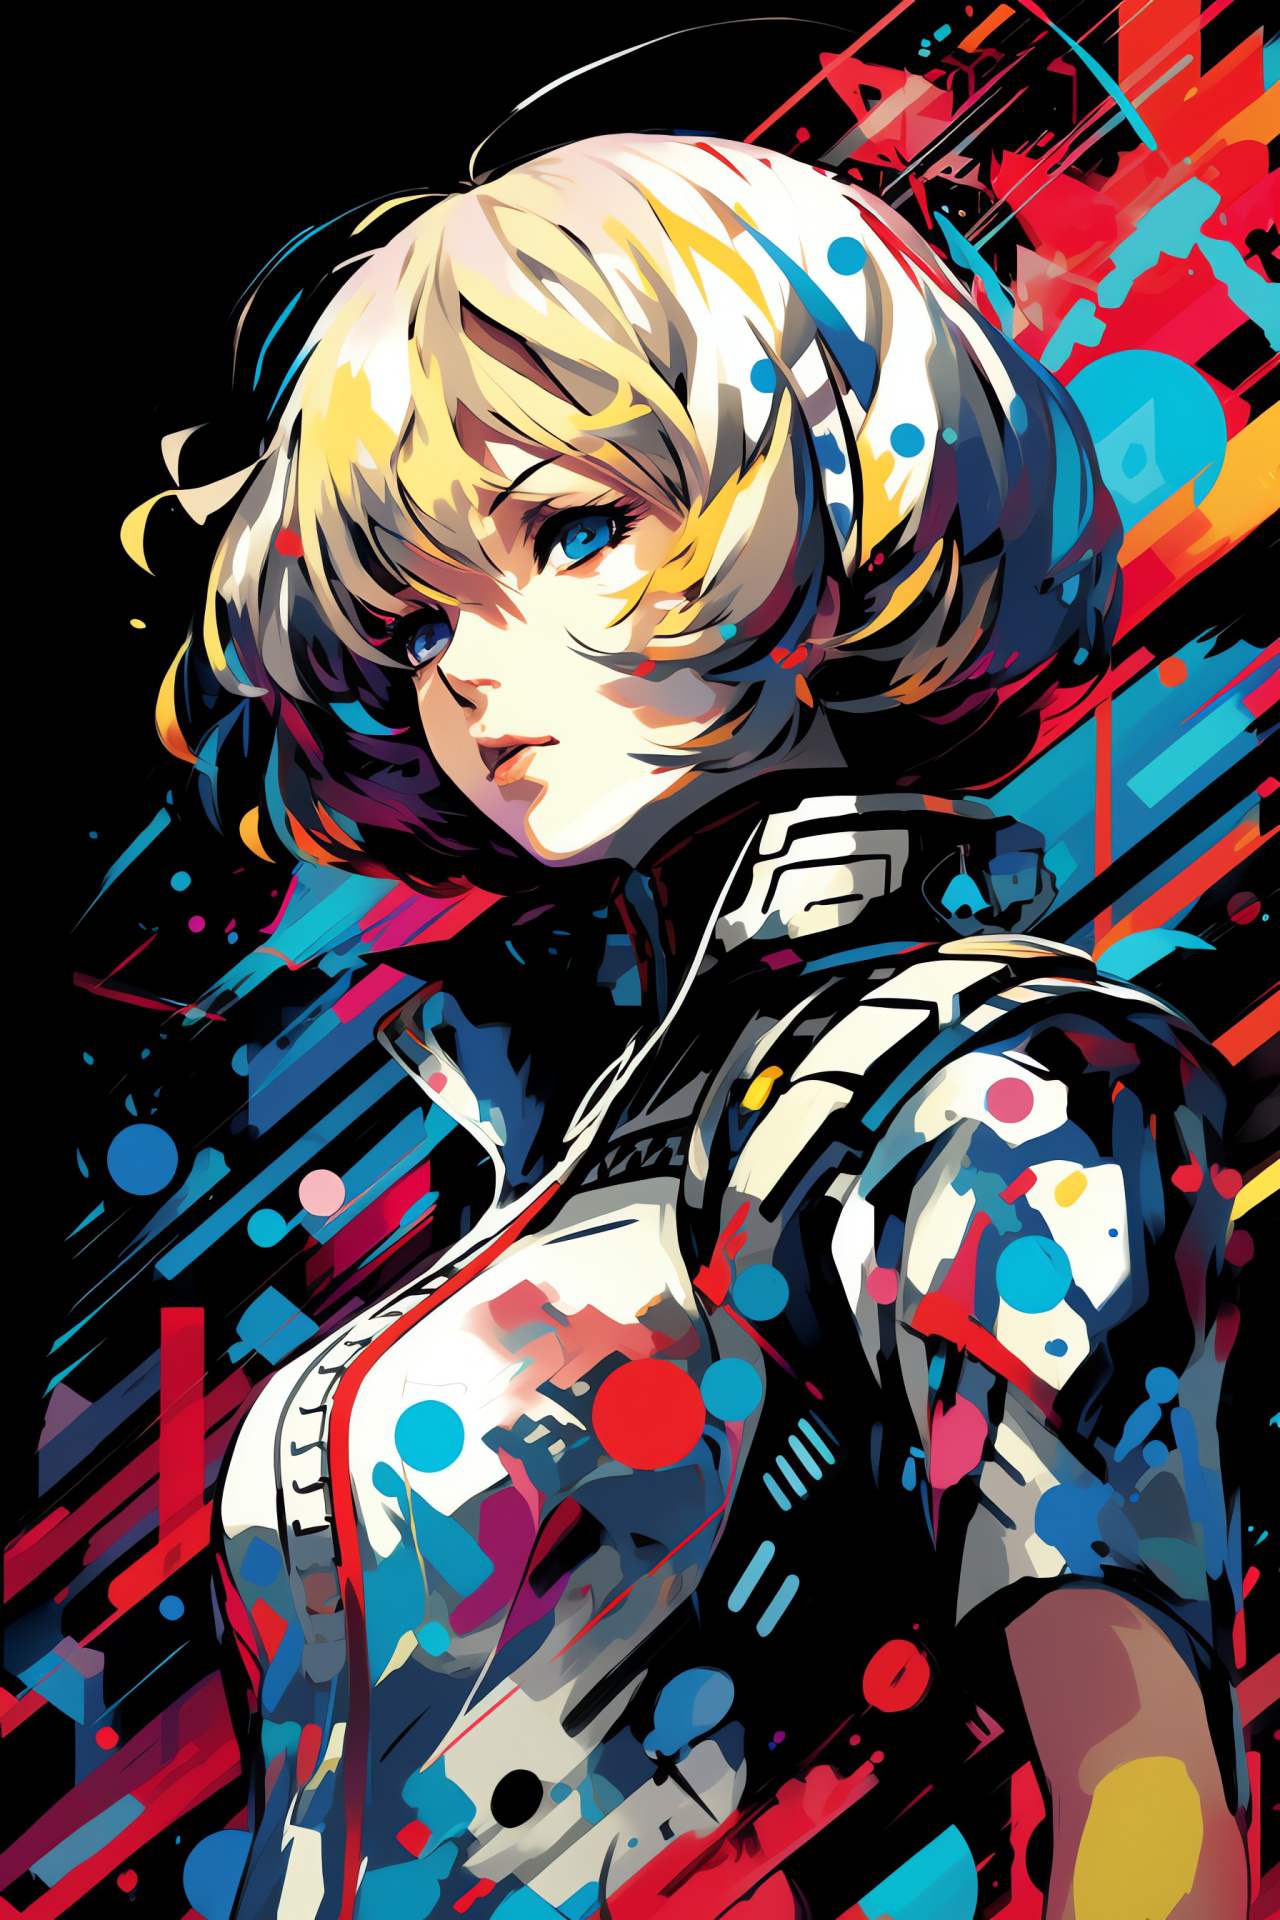 Aigis Palladion form, Persona 3 content, Stoic blue-eyed expression, Neon light radiance, Mecha-inspired design, HD Phone Image